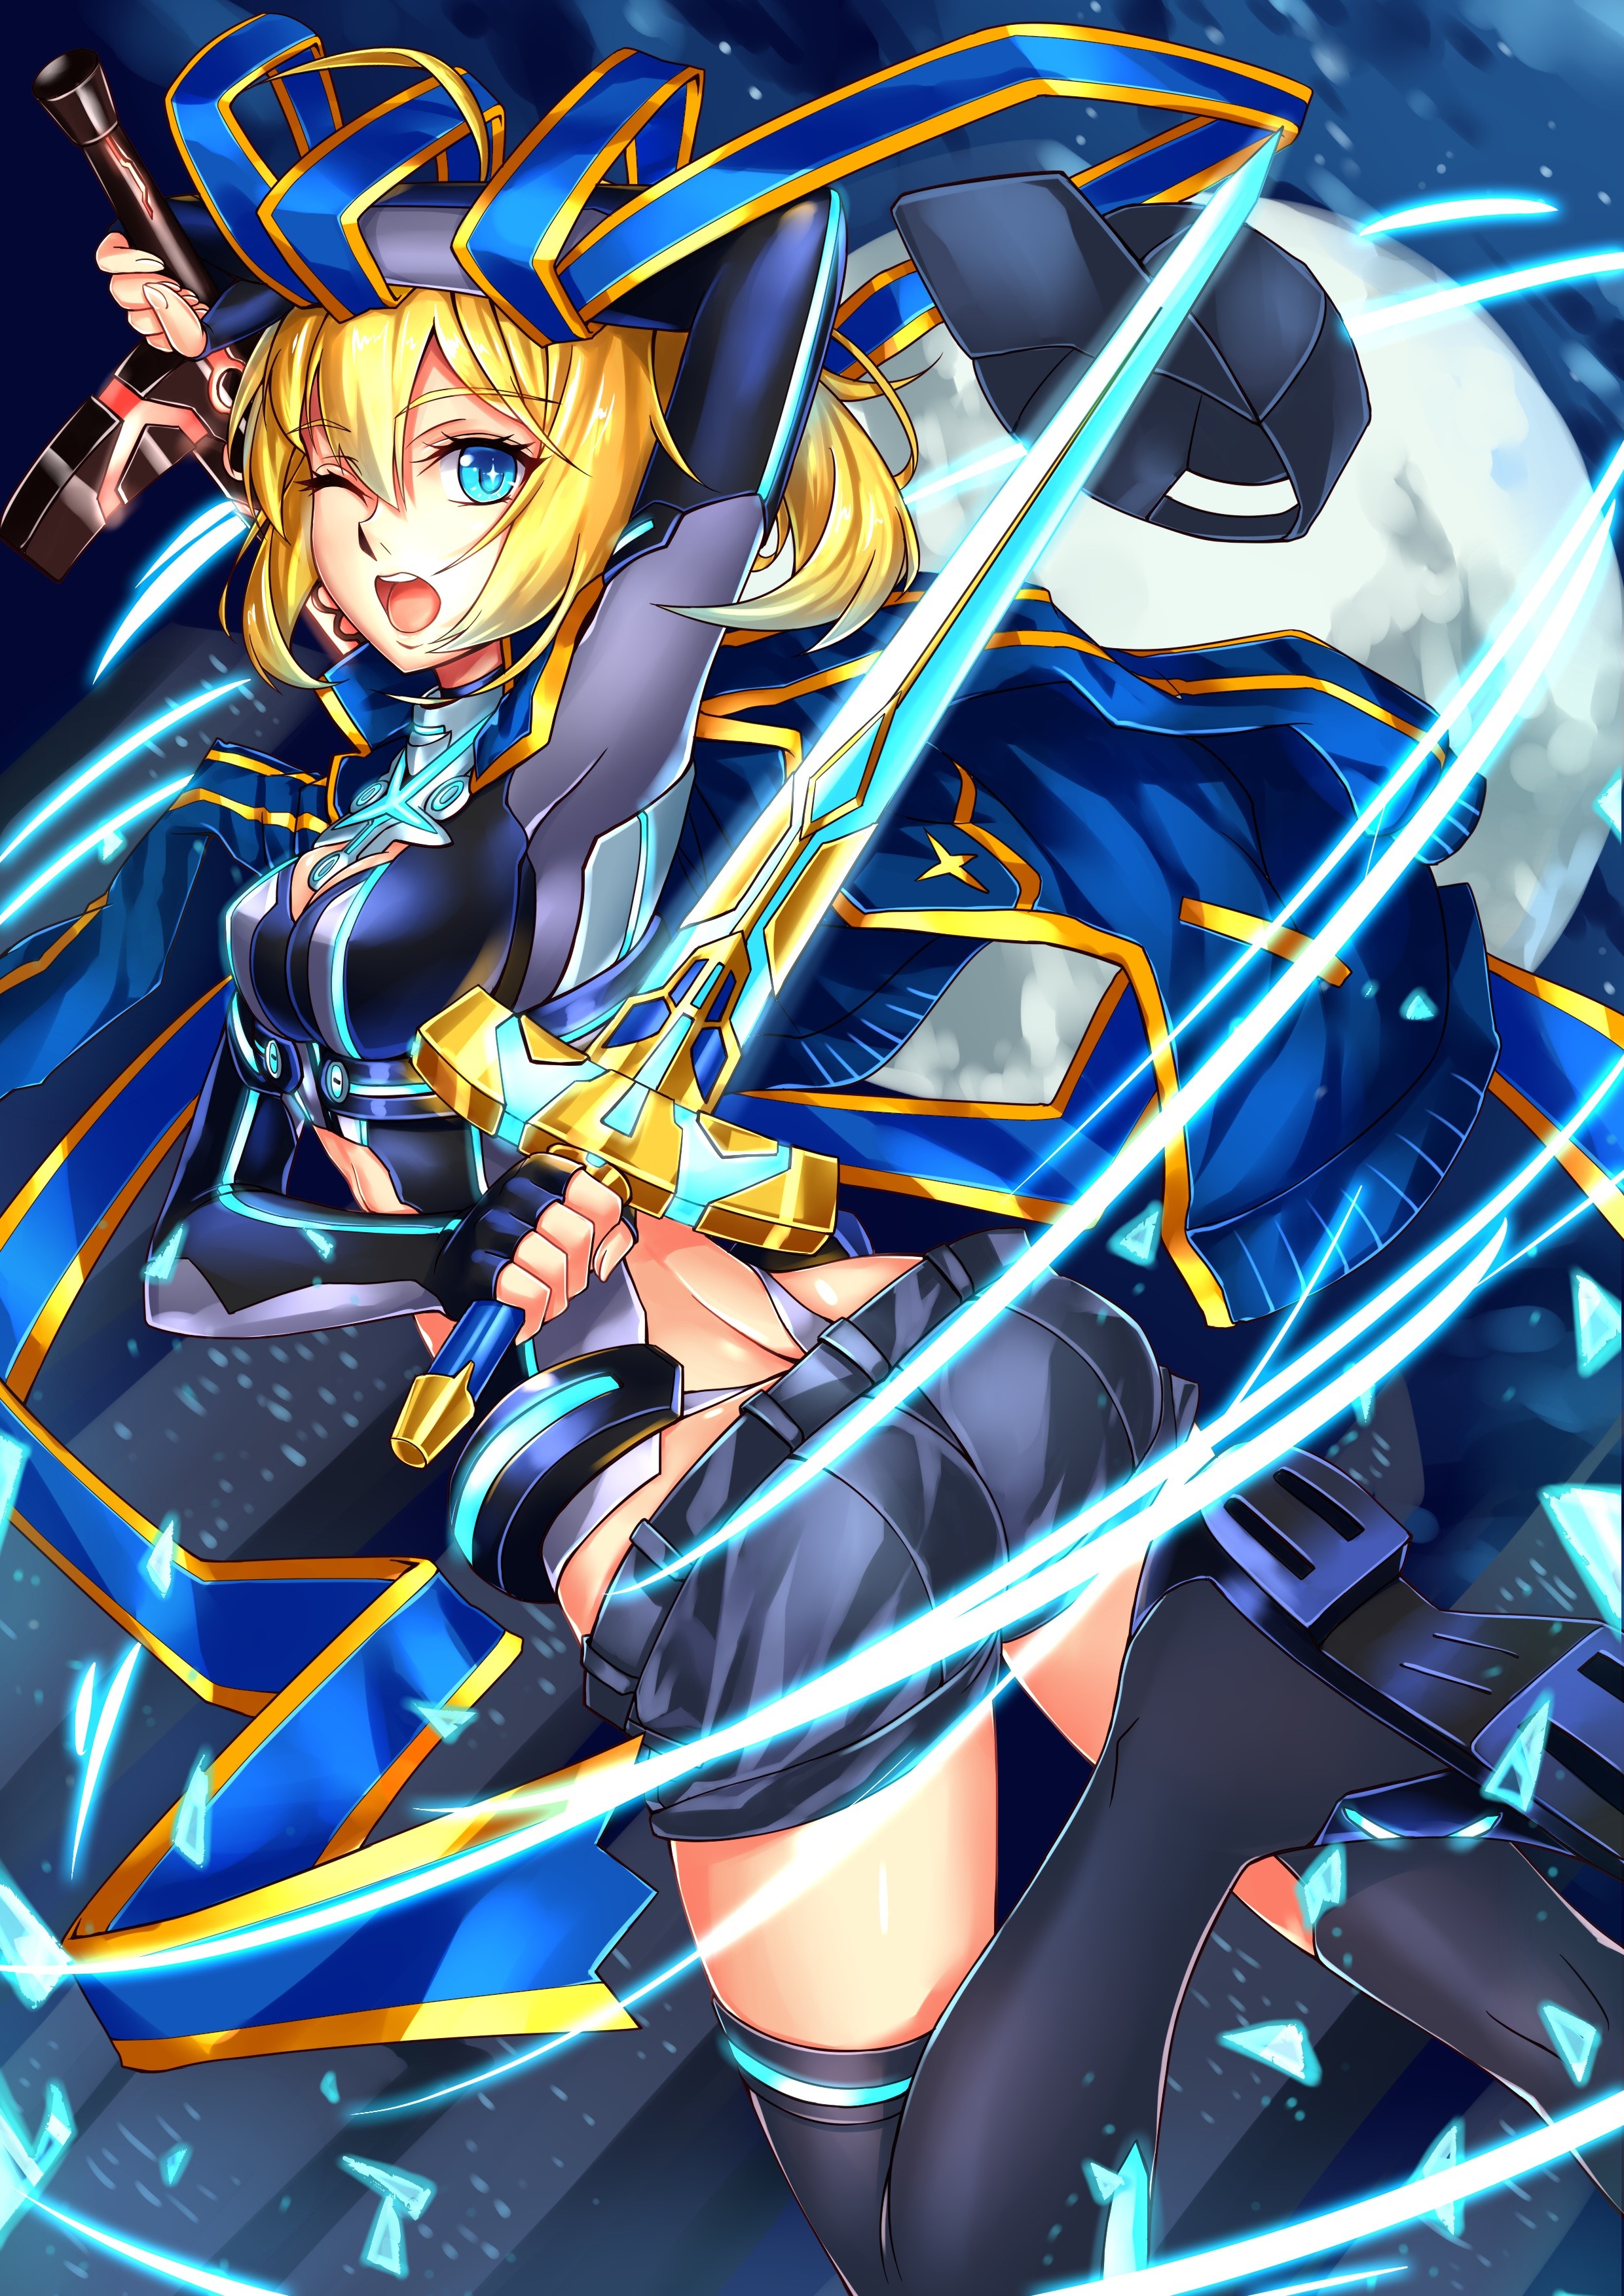 Anime 2480x3507 anime anime girls Fate/Grand Order ass sword blonde blue eyes weapon Mysterious Heroine X (Fate/Grand Order) Artoria Pendragon Fate series Pixiv women with swords fantasy art fantasy girl